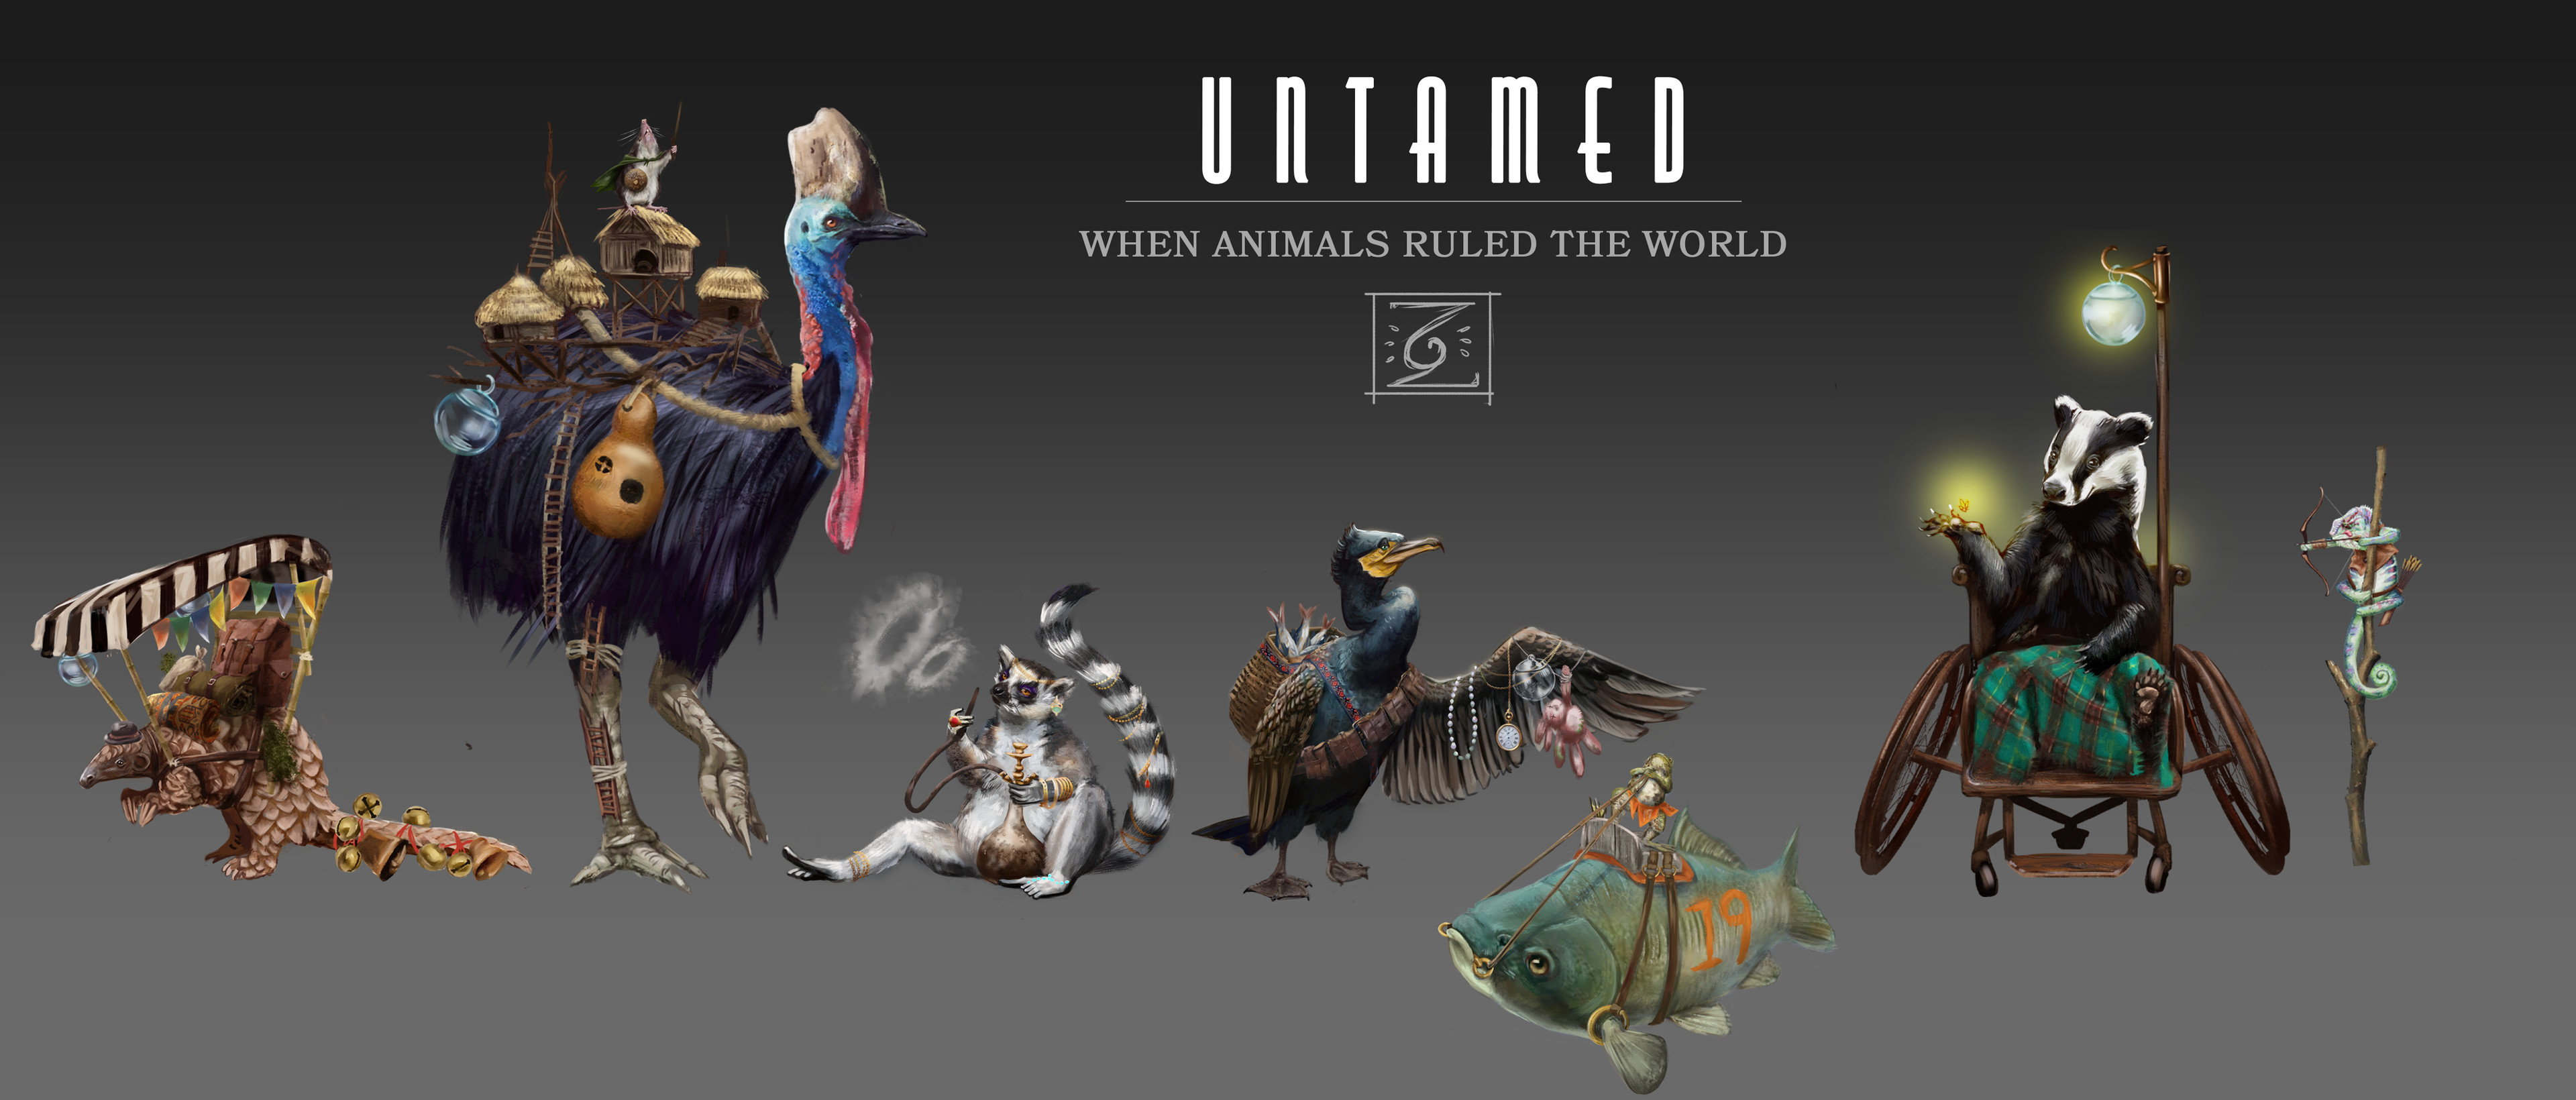 Twig Zorn - Untamed: when animals ruled the world